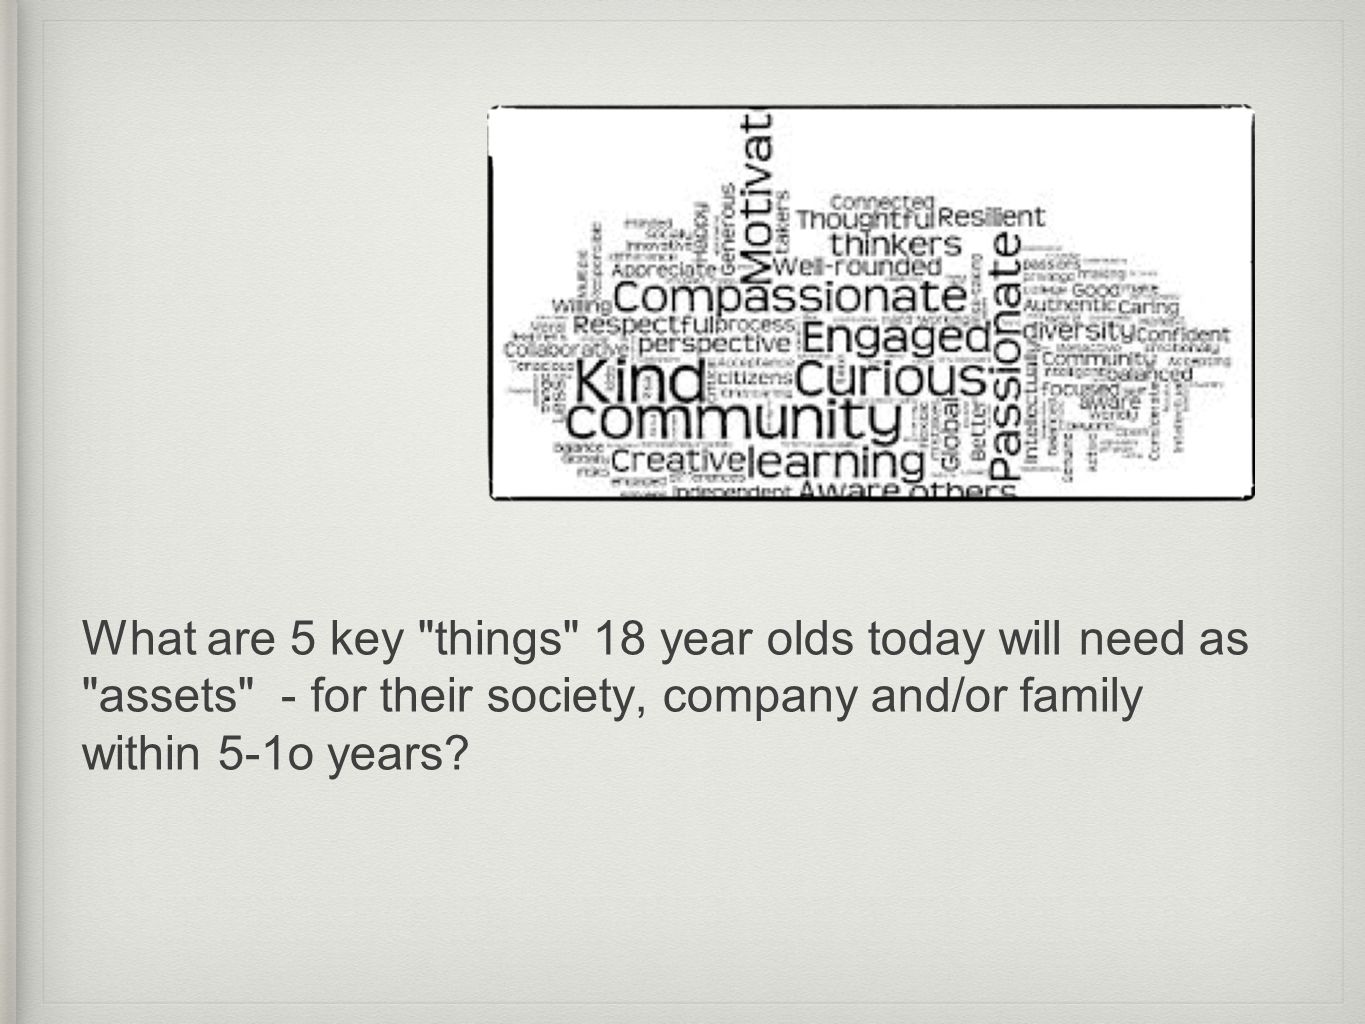 What are 5 key things 18 year olds today will need as assets - for their society, company and/or family within 5-1o years